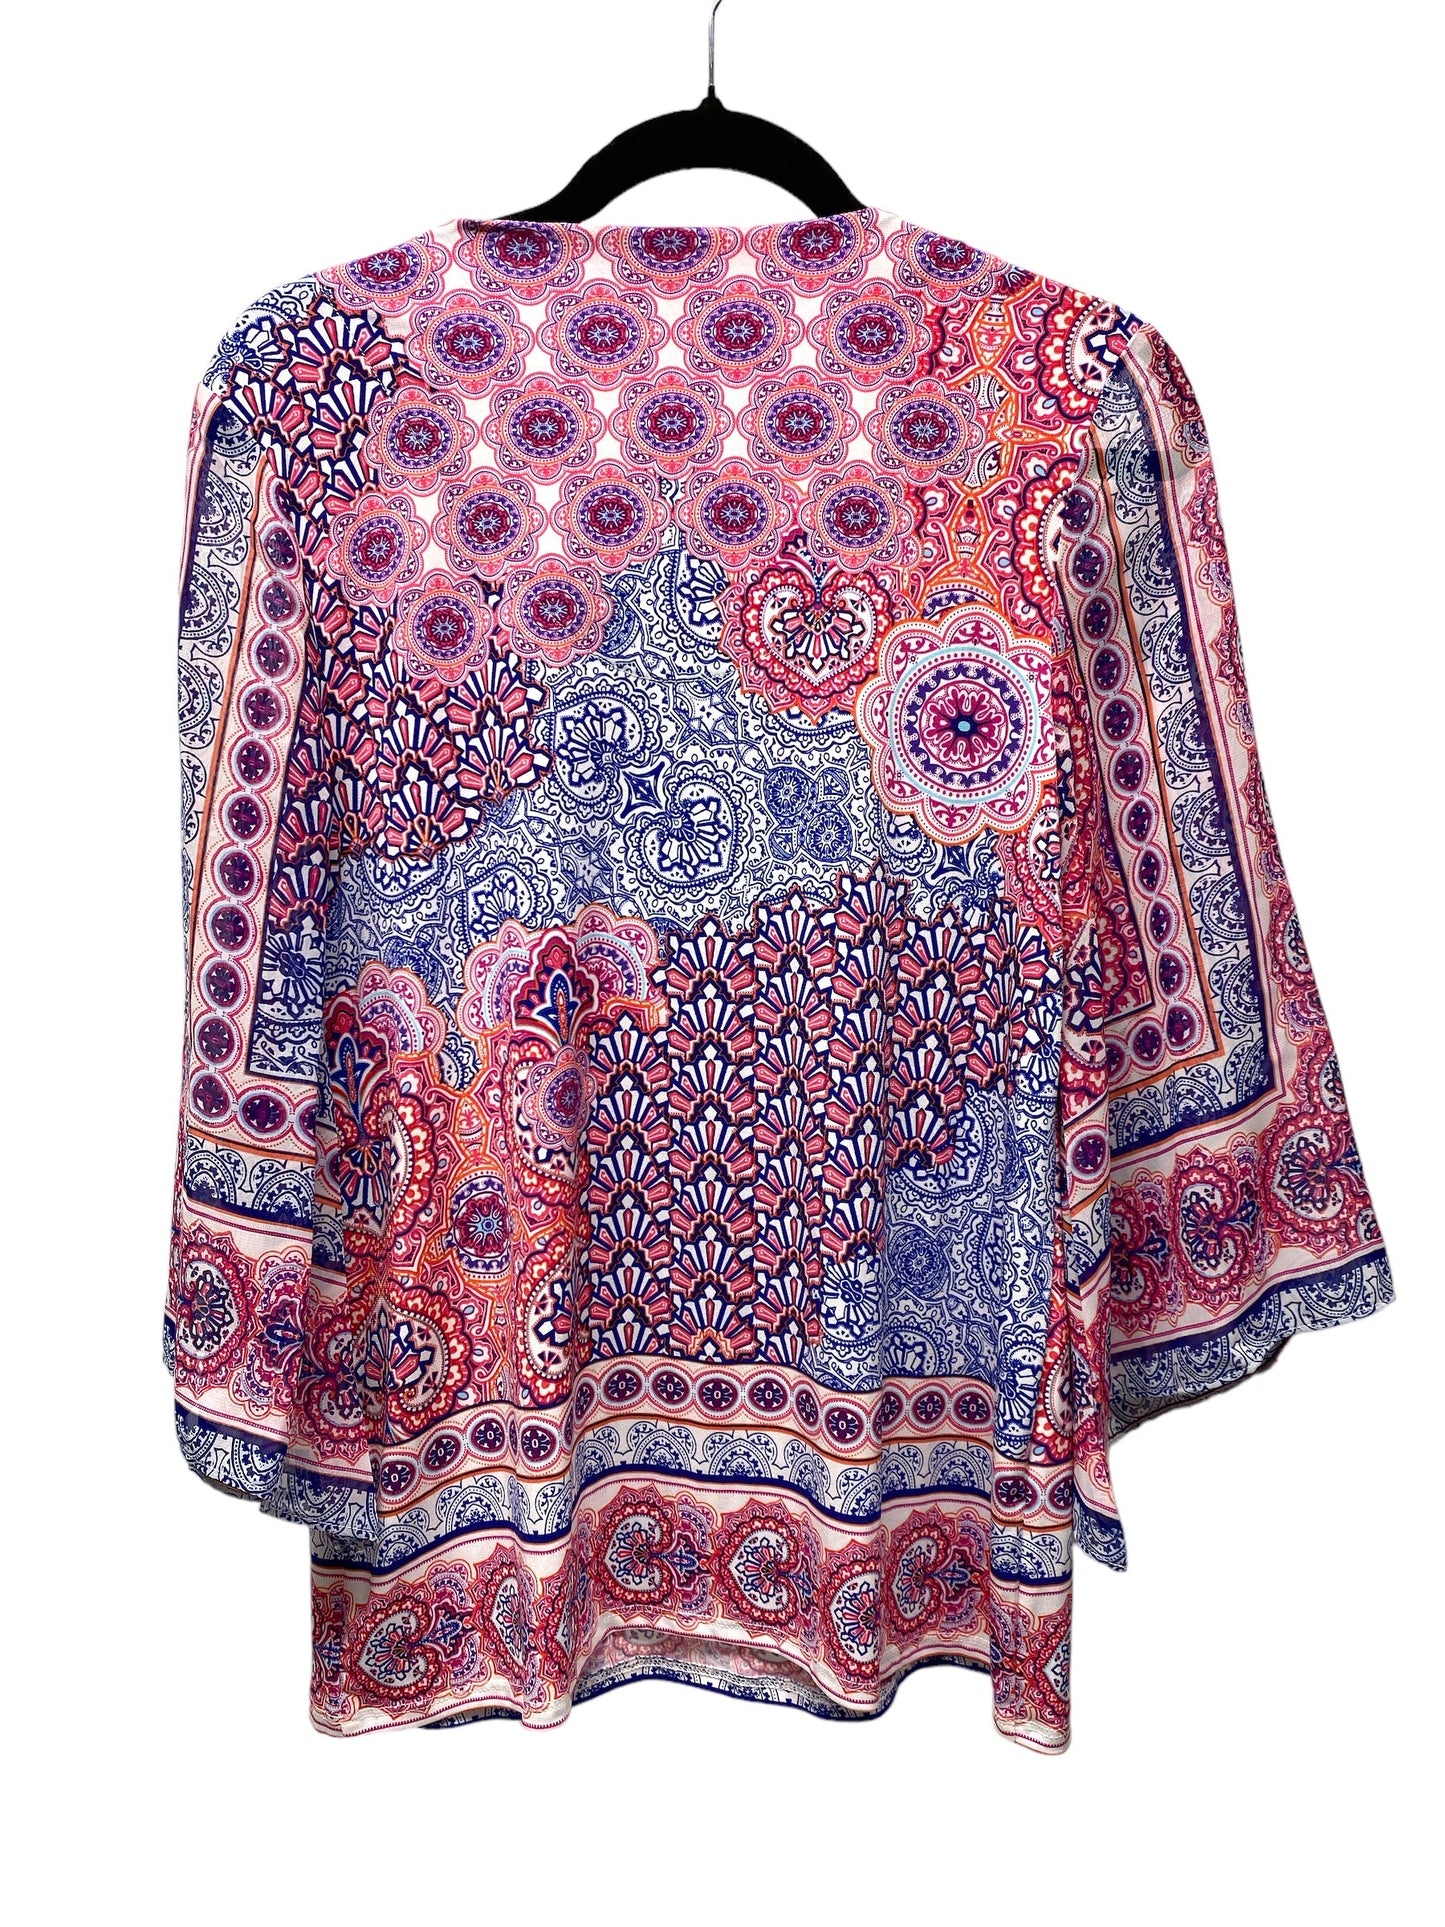 Paisley Print Top 3/4 Sleeve Chicos, Size S